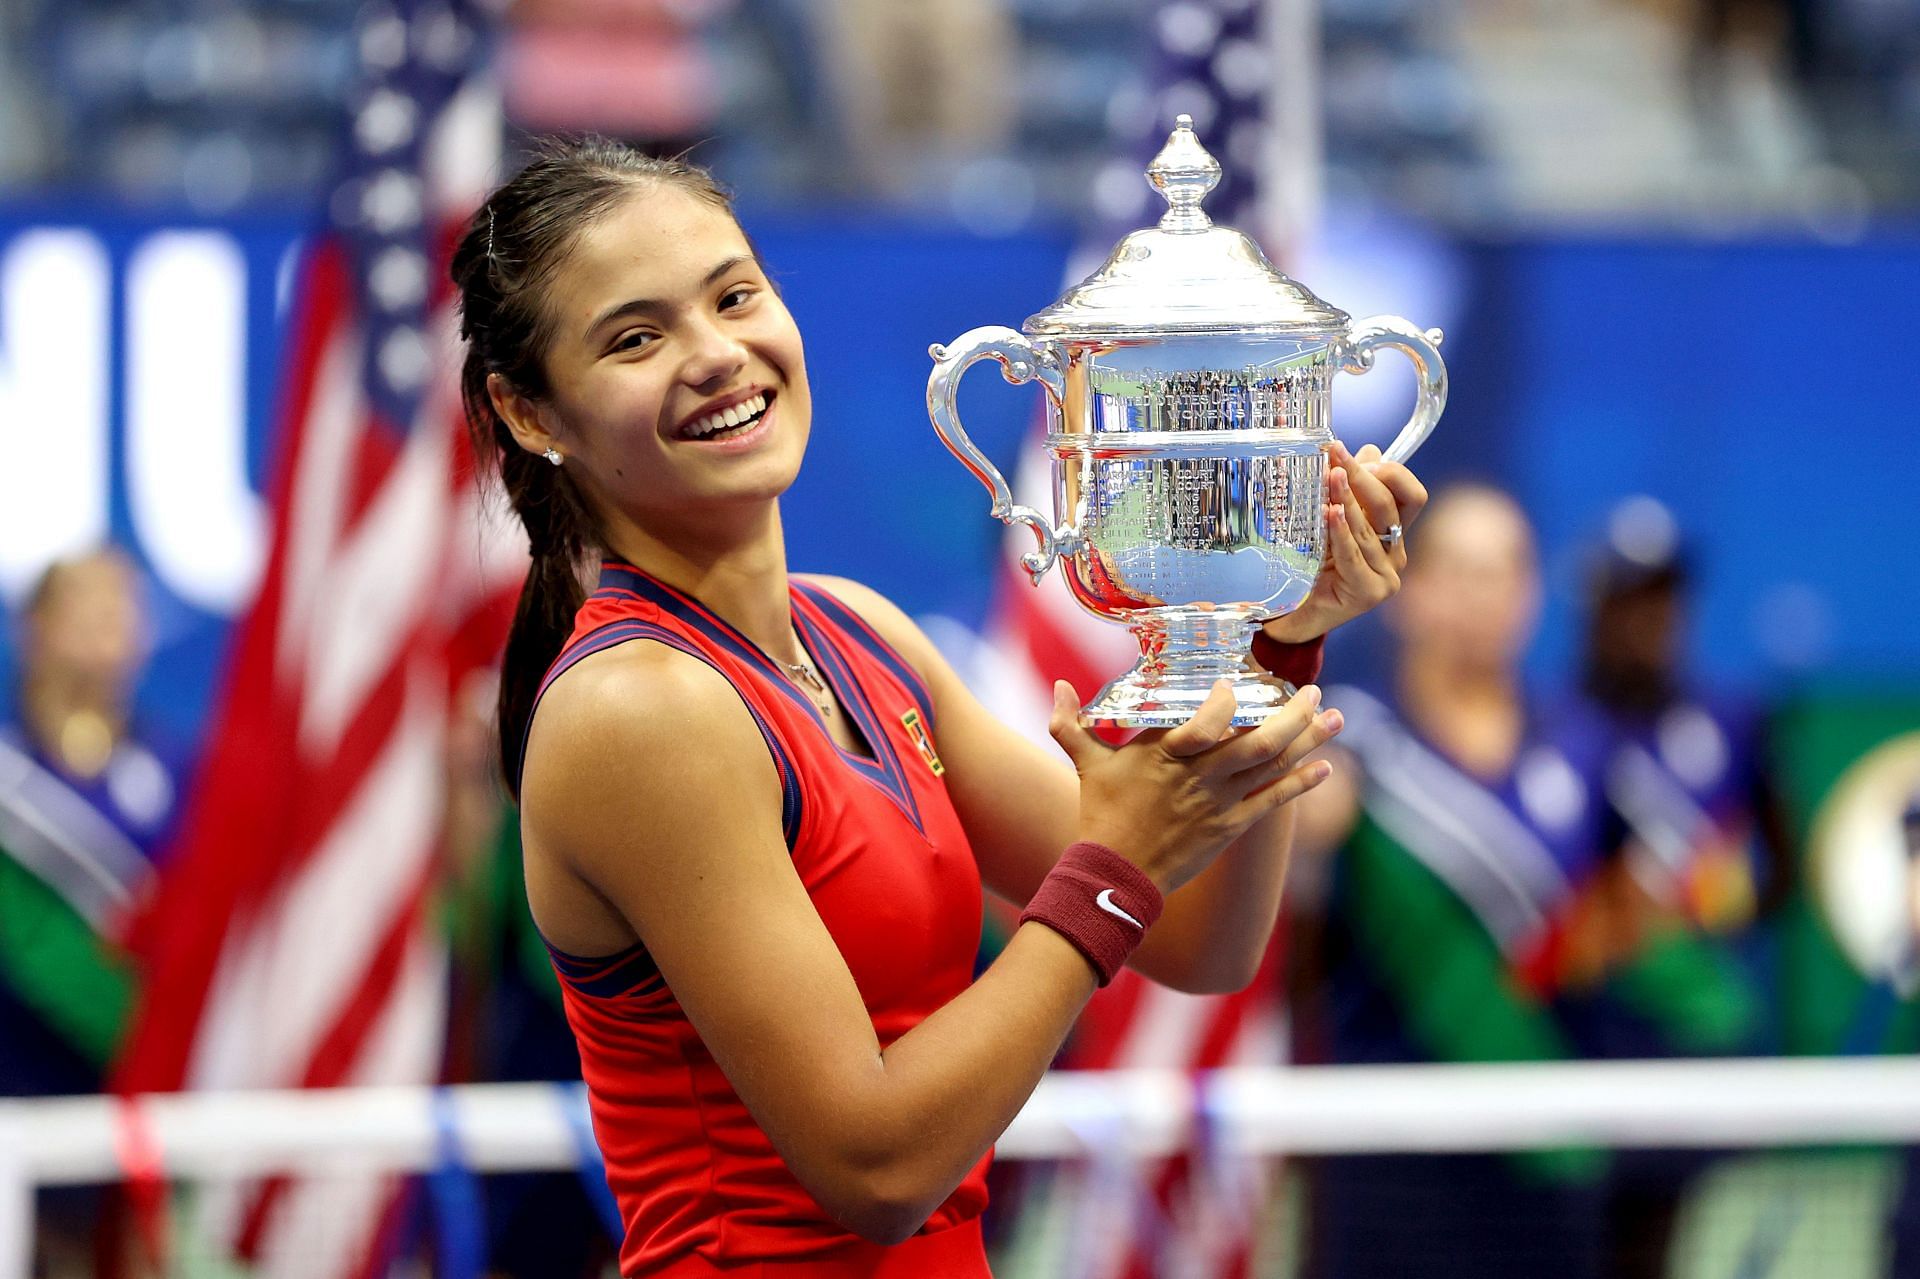 Emma Raducanu pictured with her 2021 US Open US Open trophy